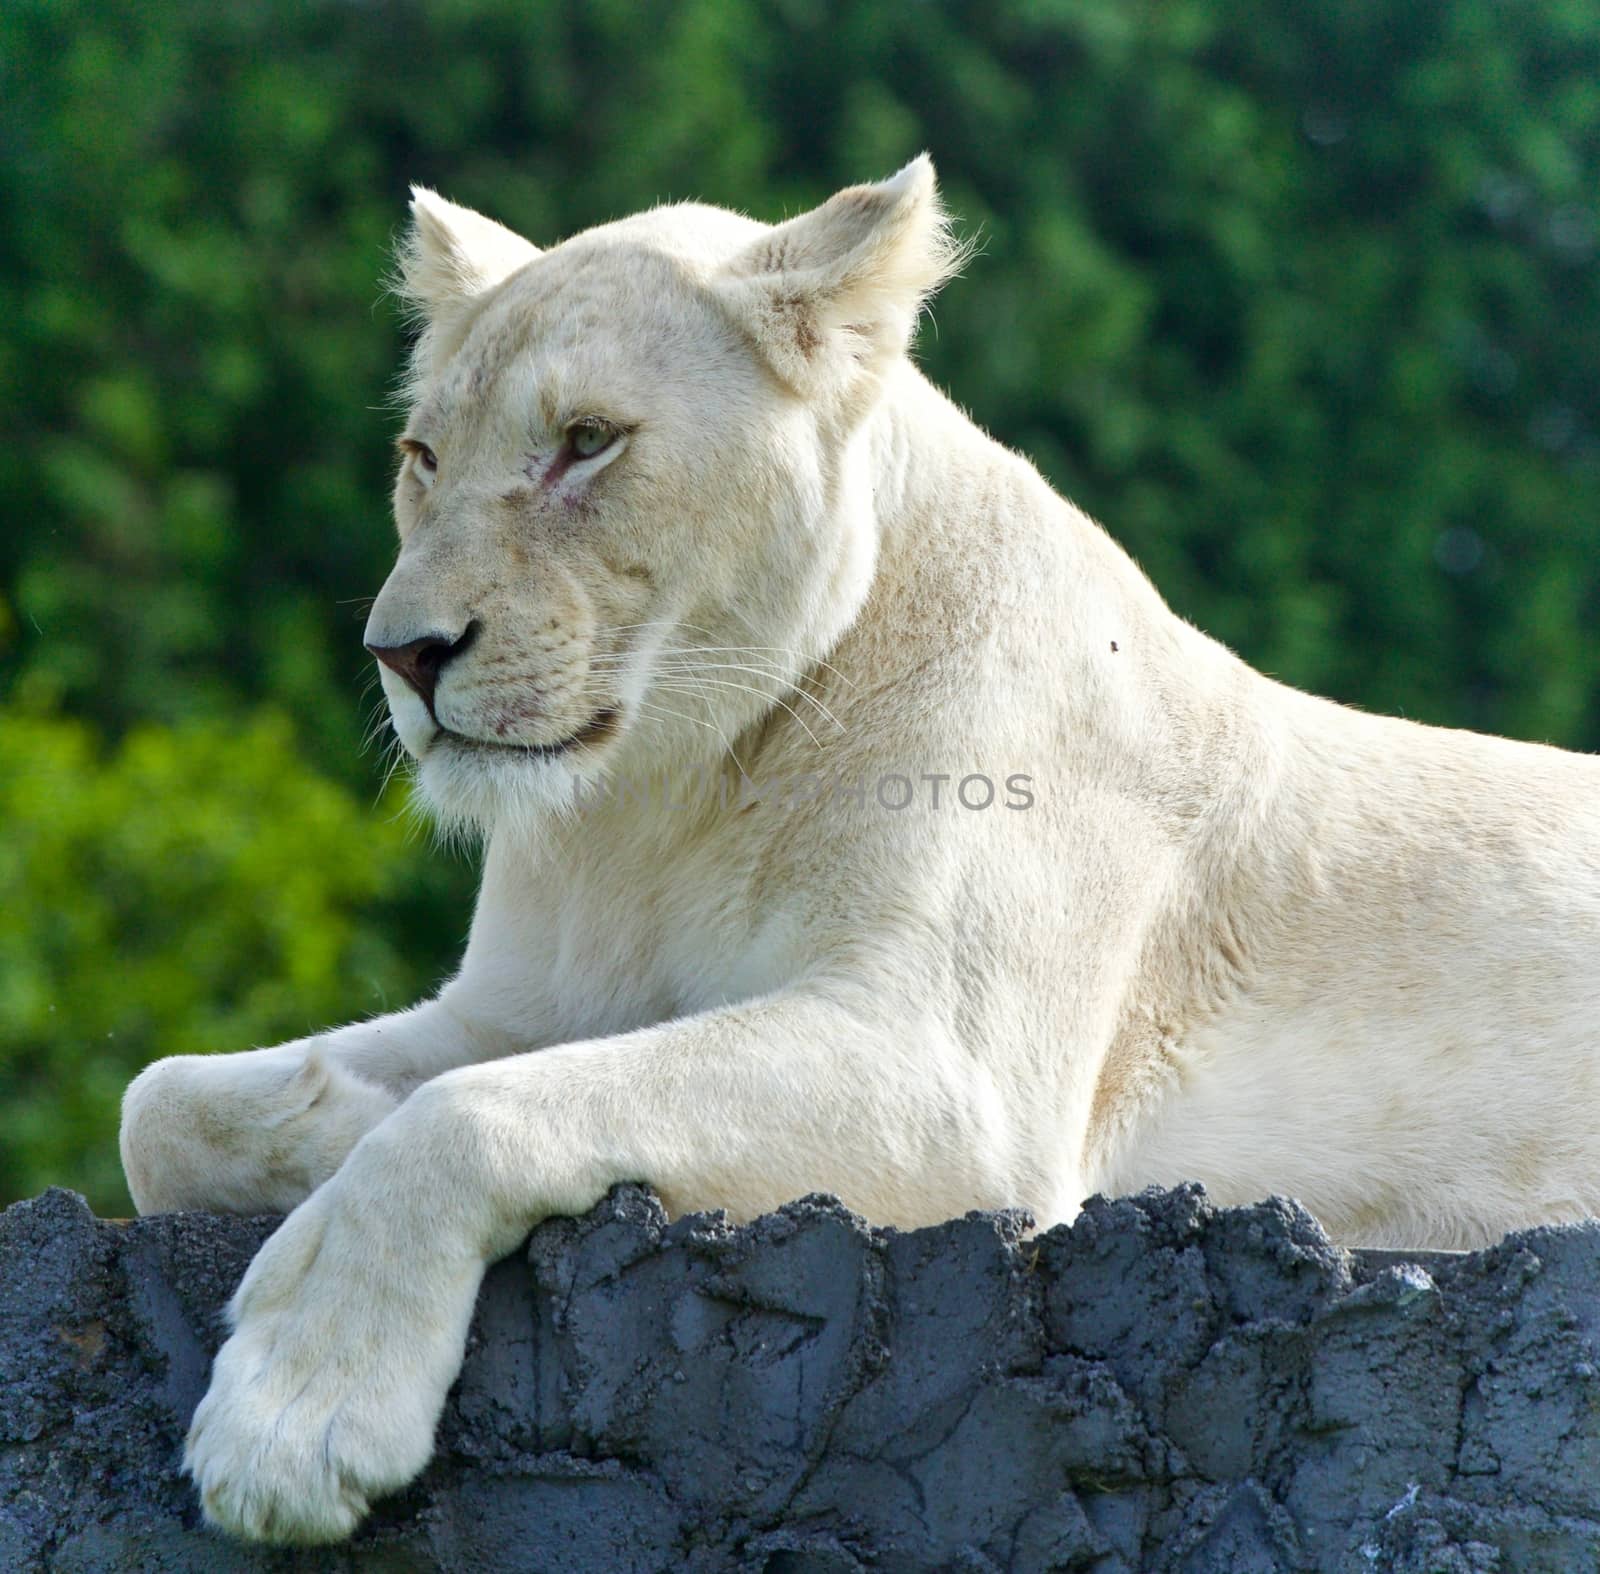 Image of a funny white lion trying not to sleep